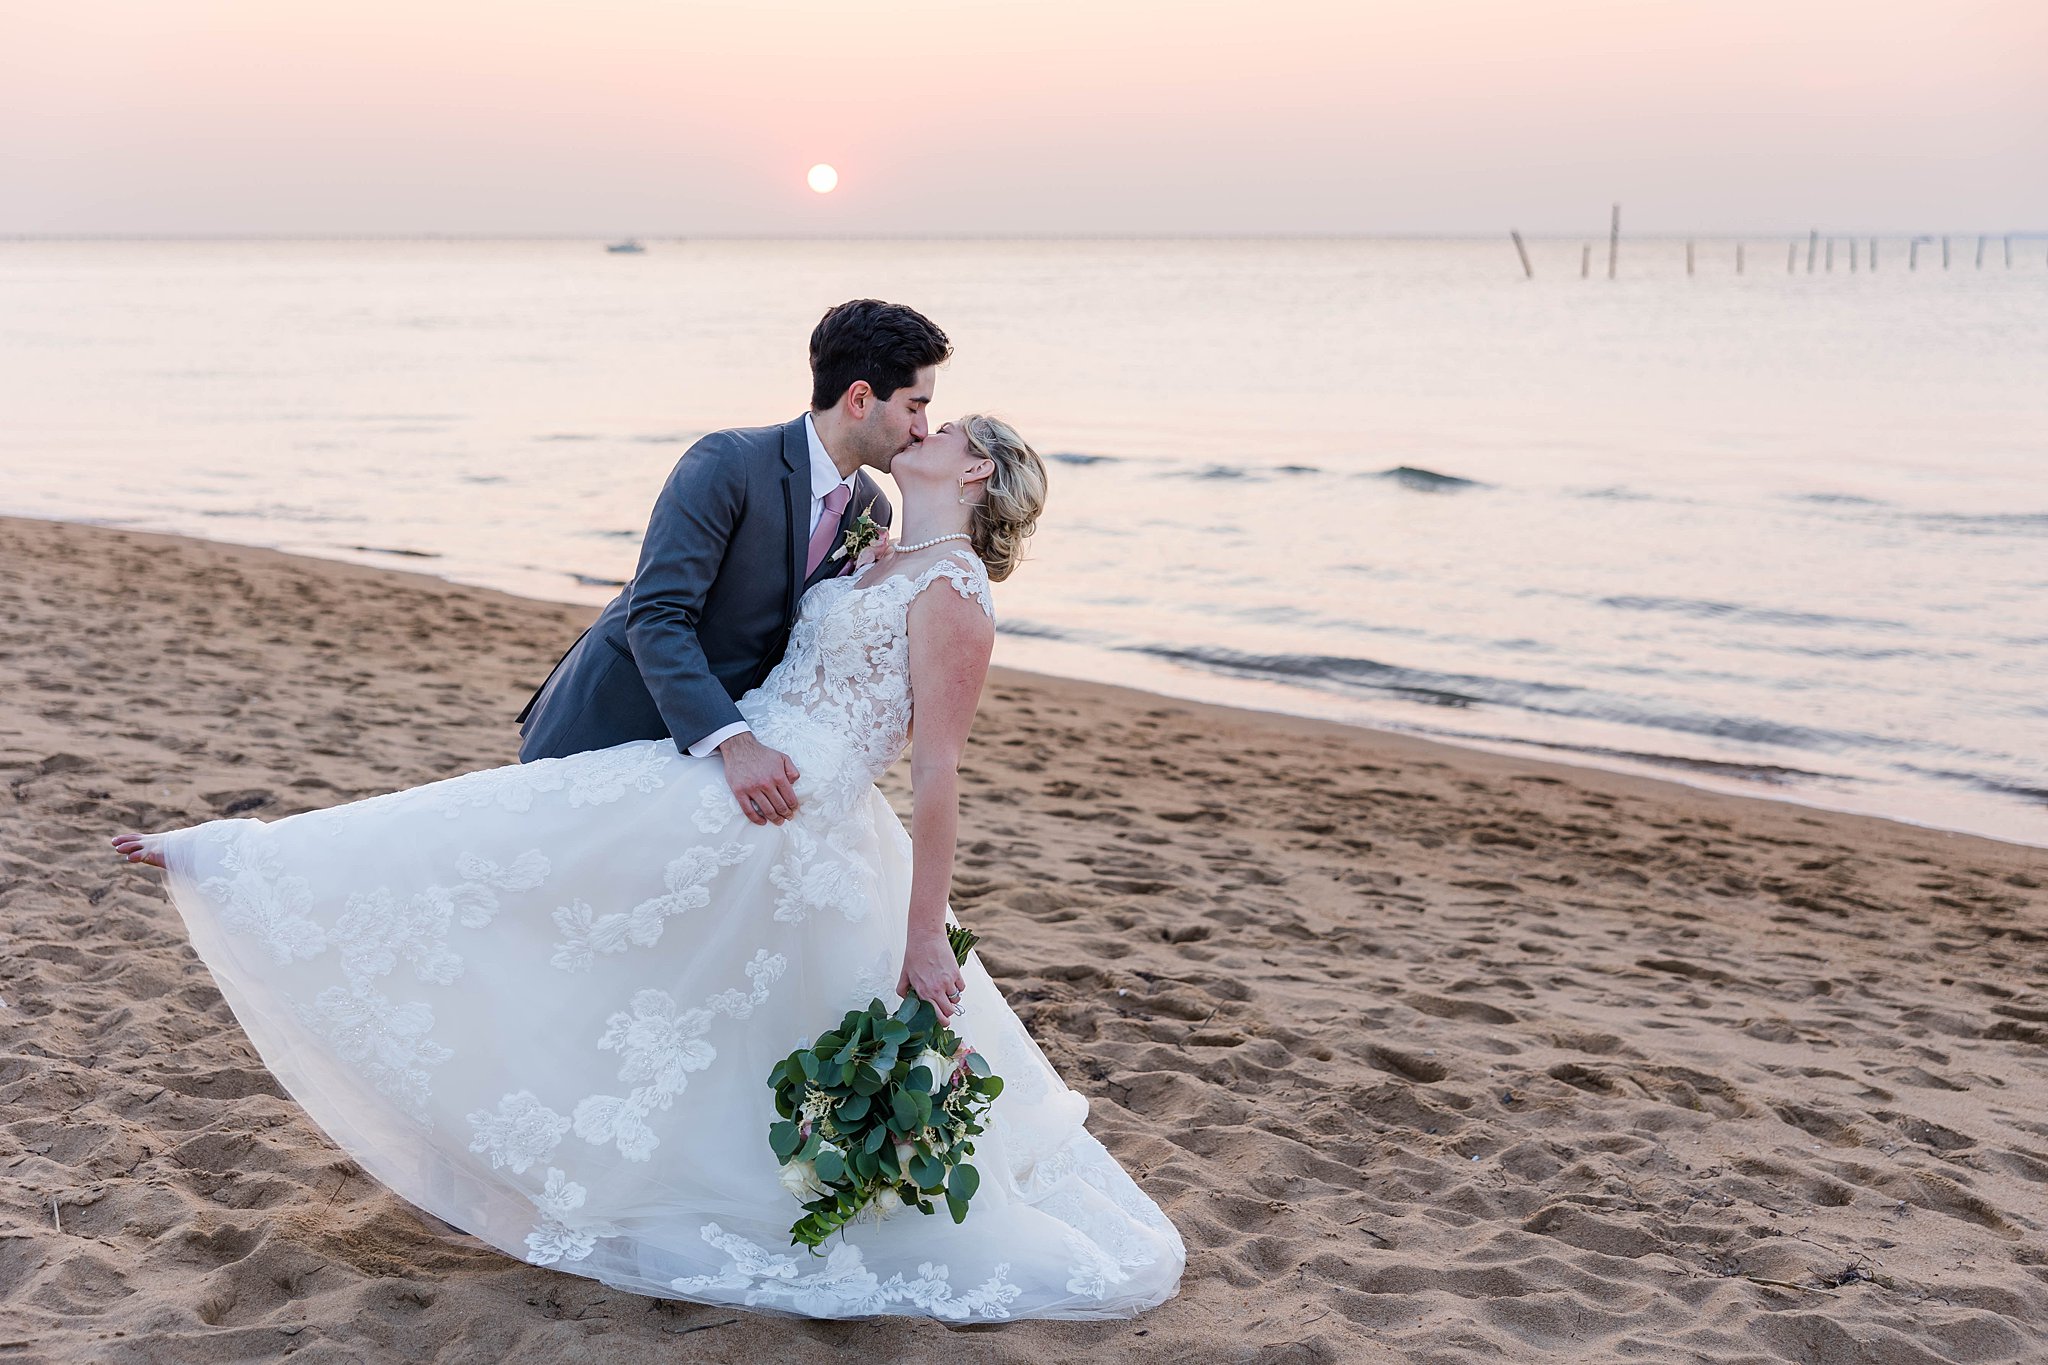 Groom kisses bride while dipping her with sunset behind them at Delta Hotels wedding in VA Beach